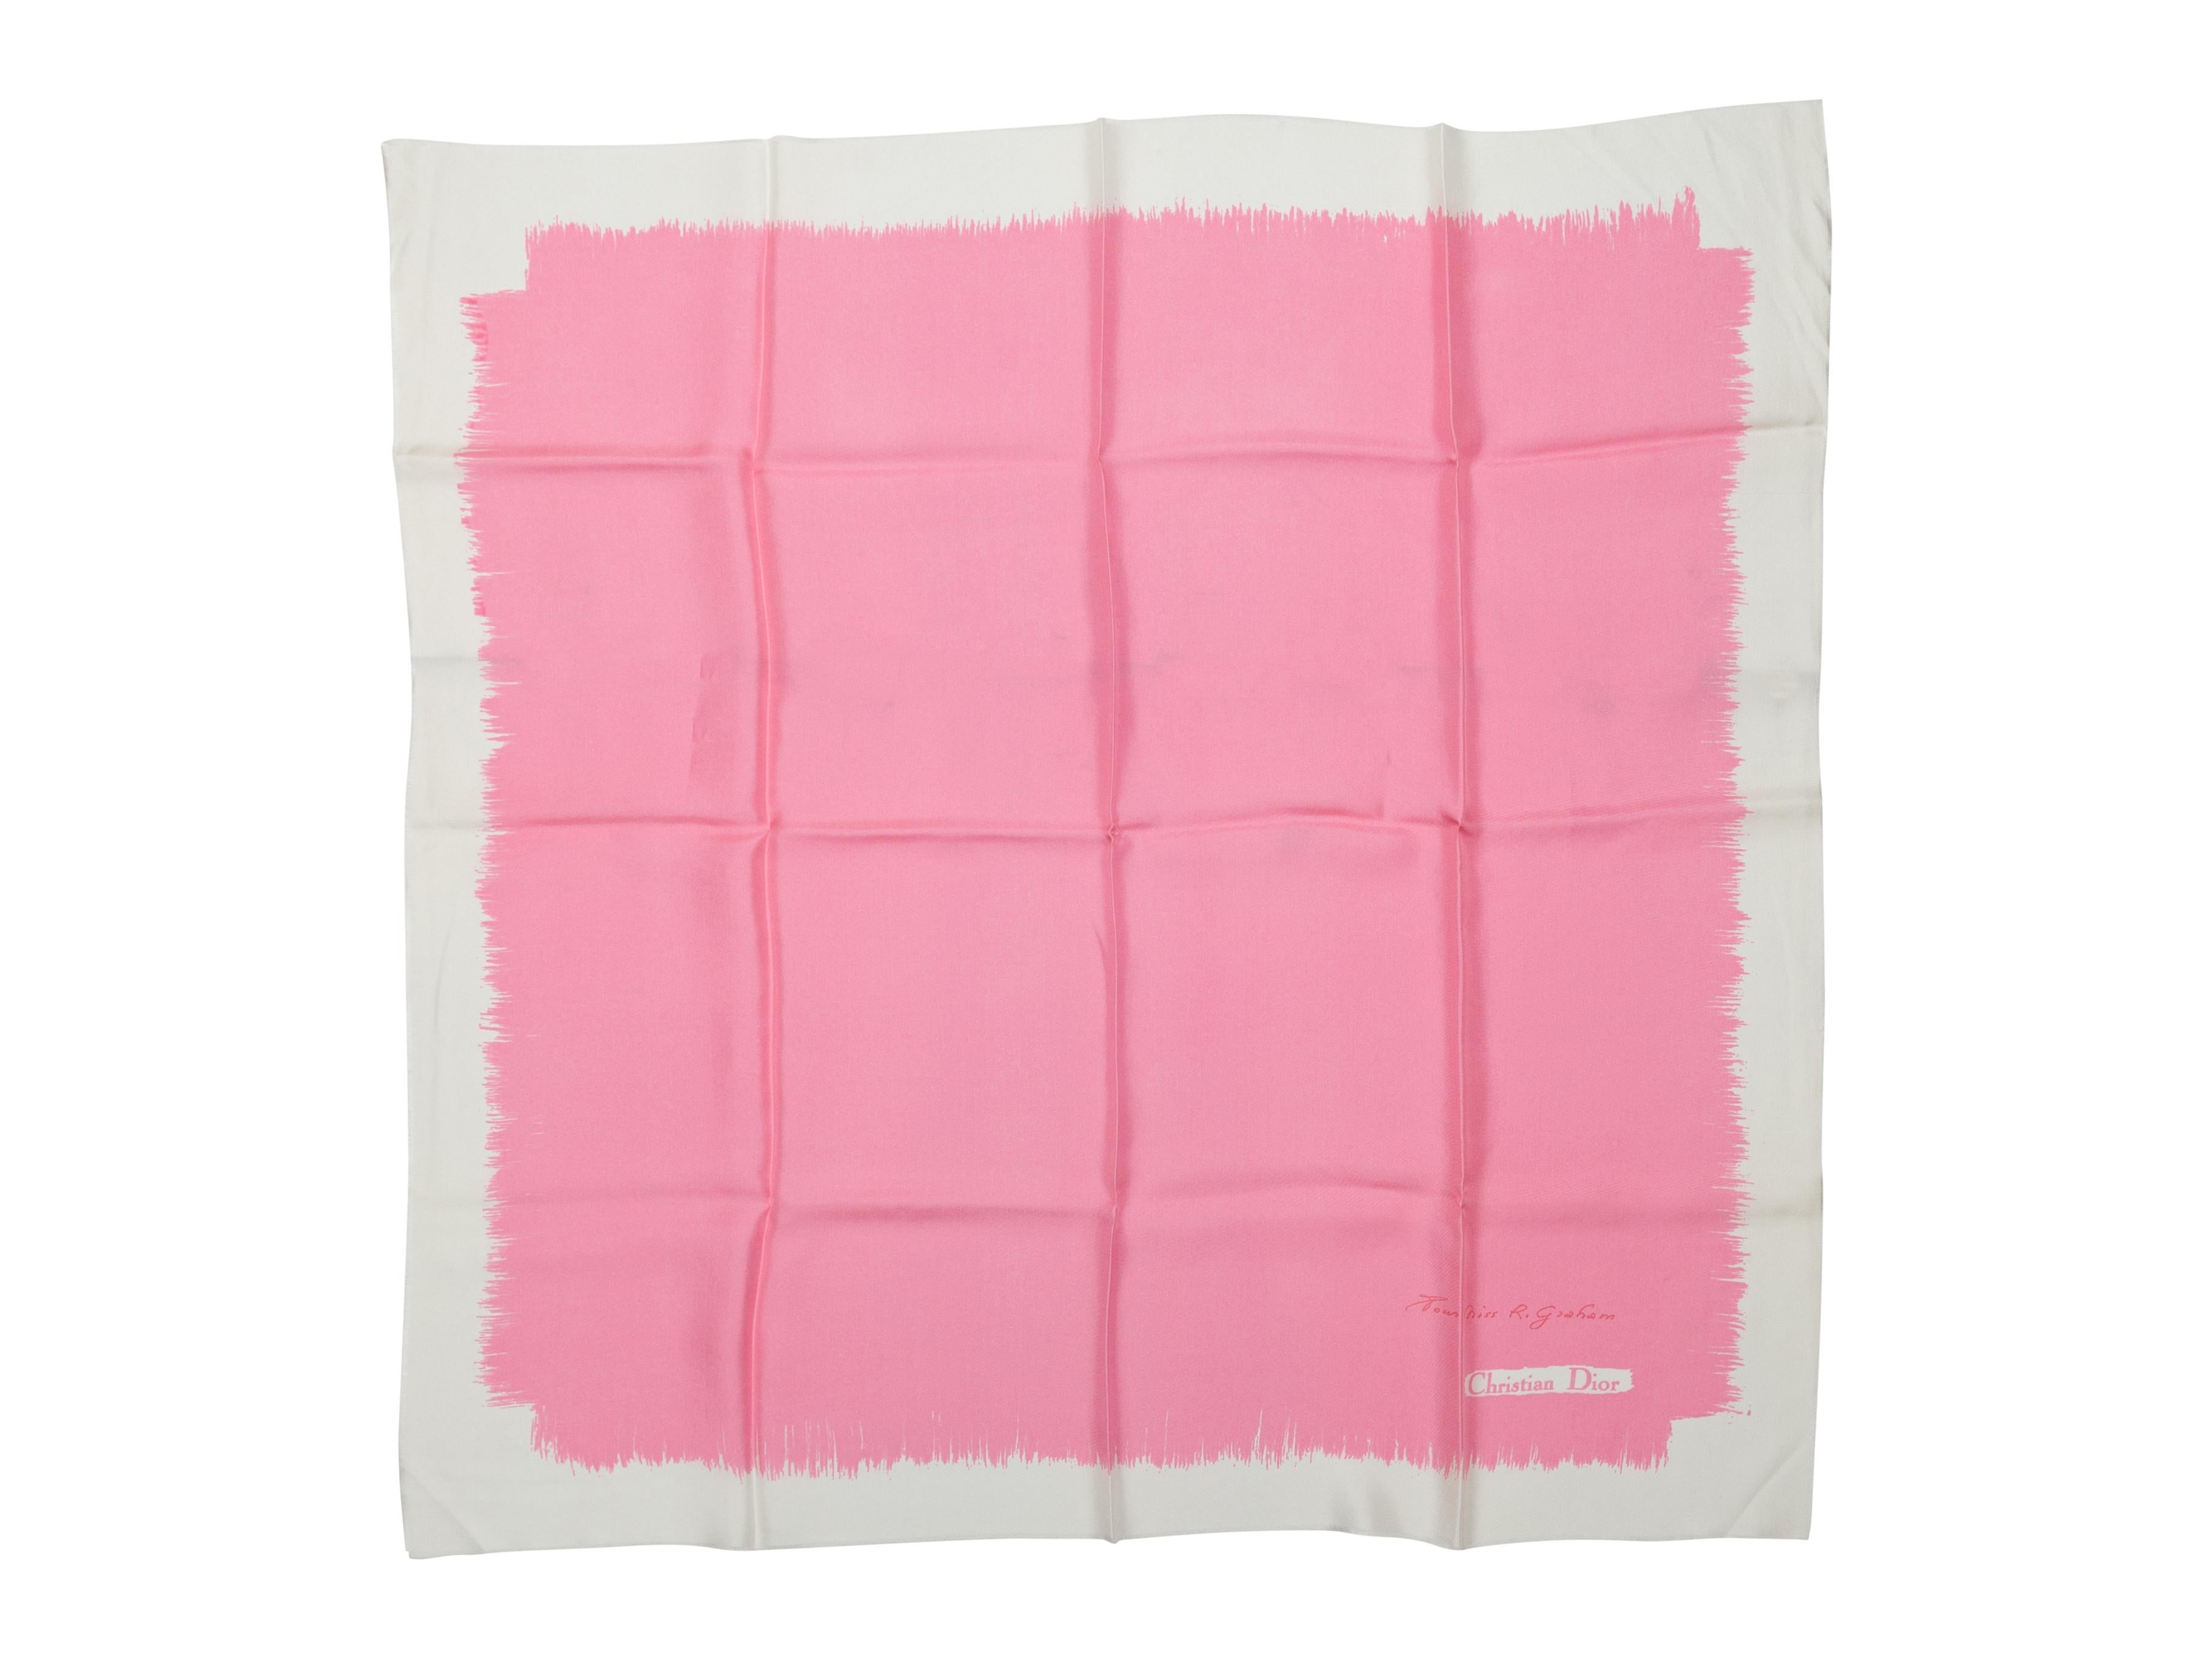 Product details: Pink and white square silk scarf by Christian Dior. 34